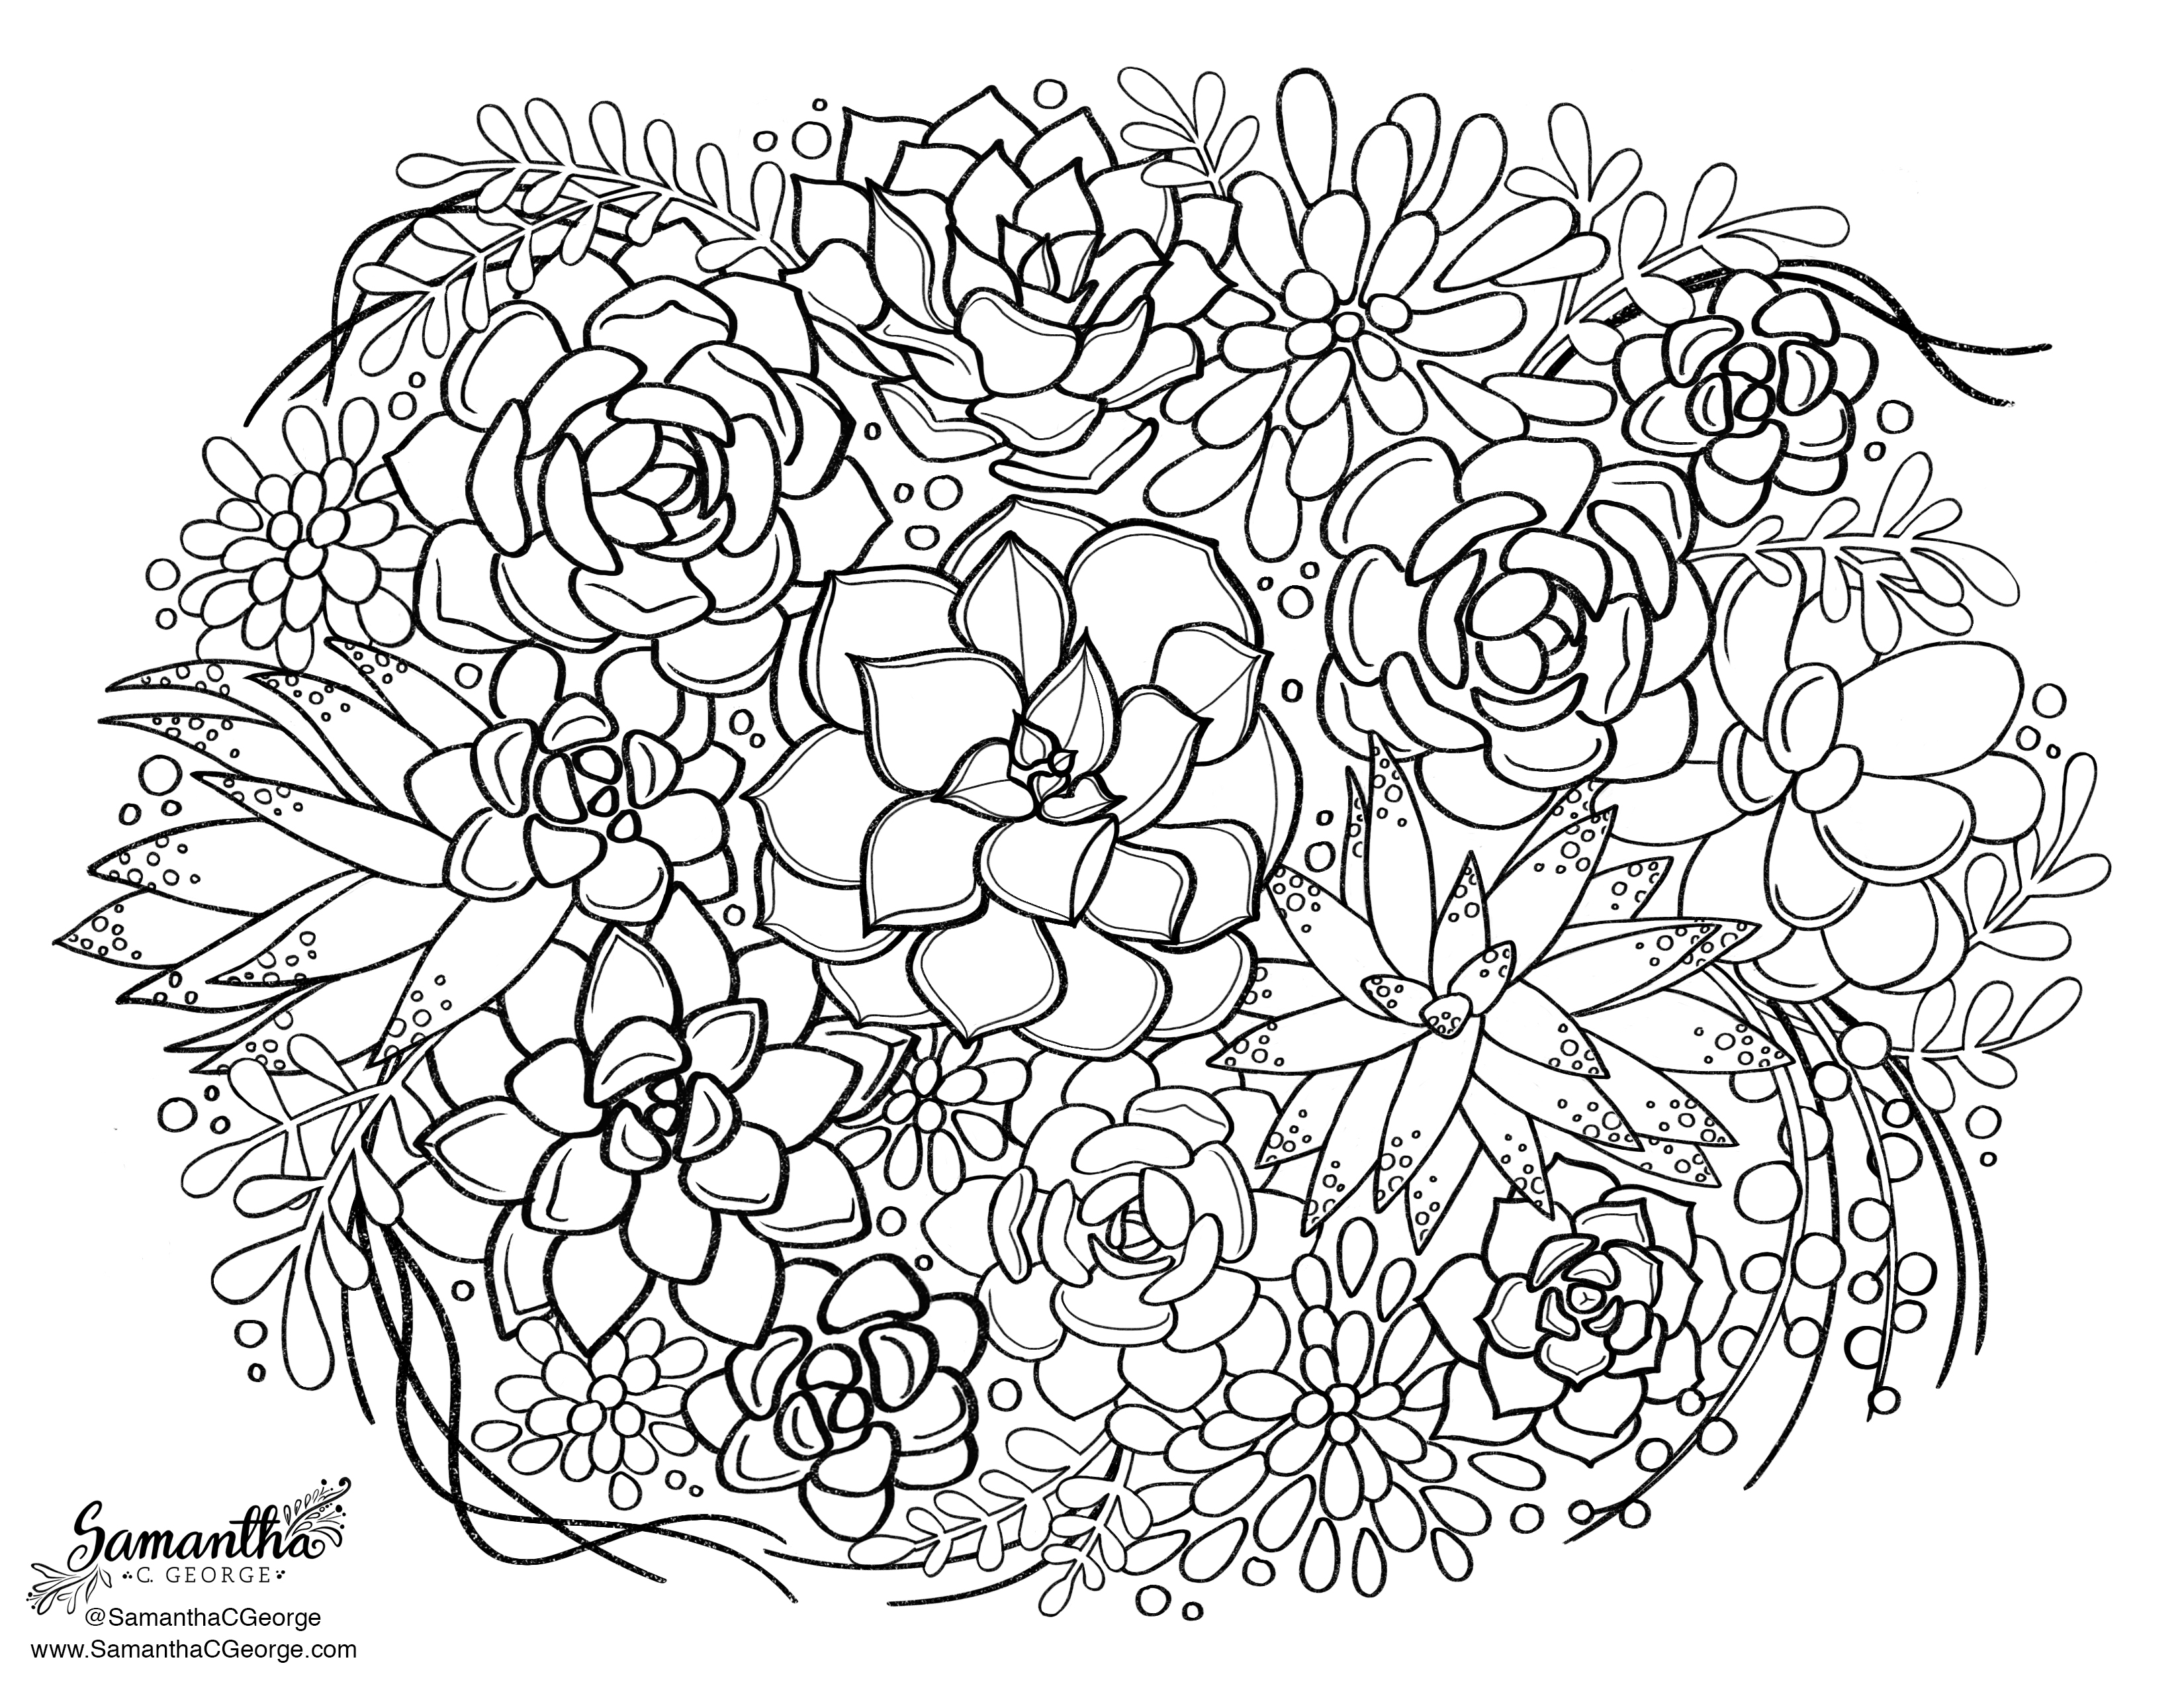 black and white line art of succulents on a letter size piece of paper